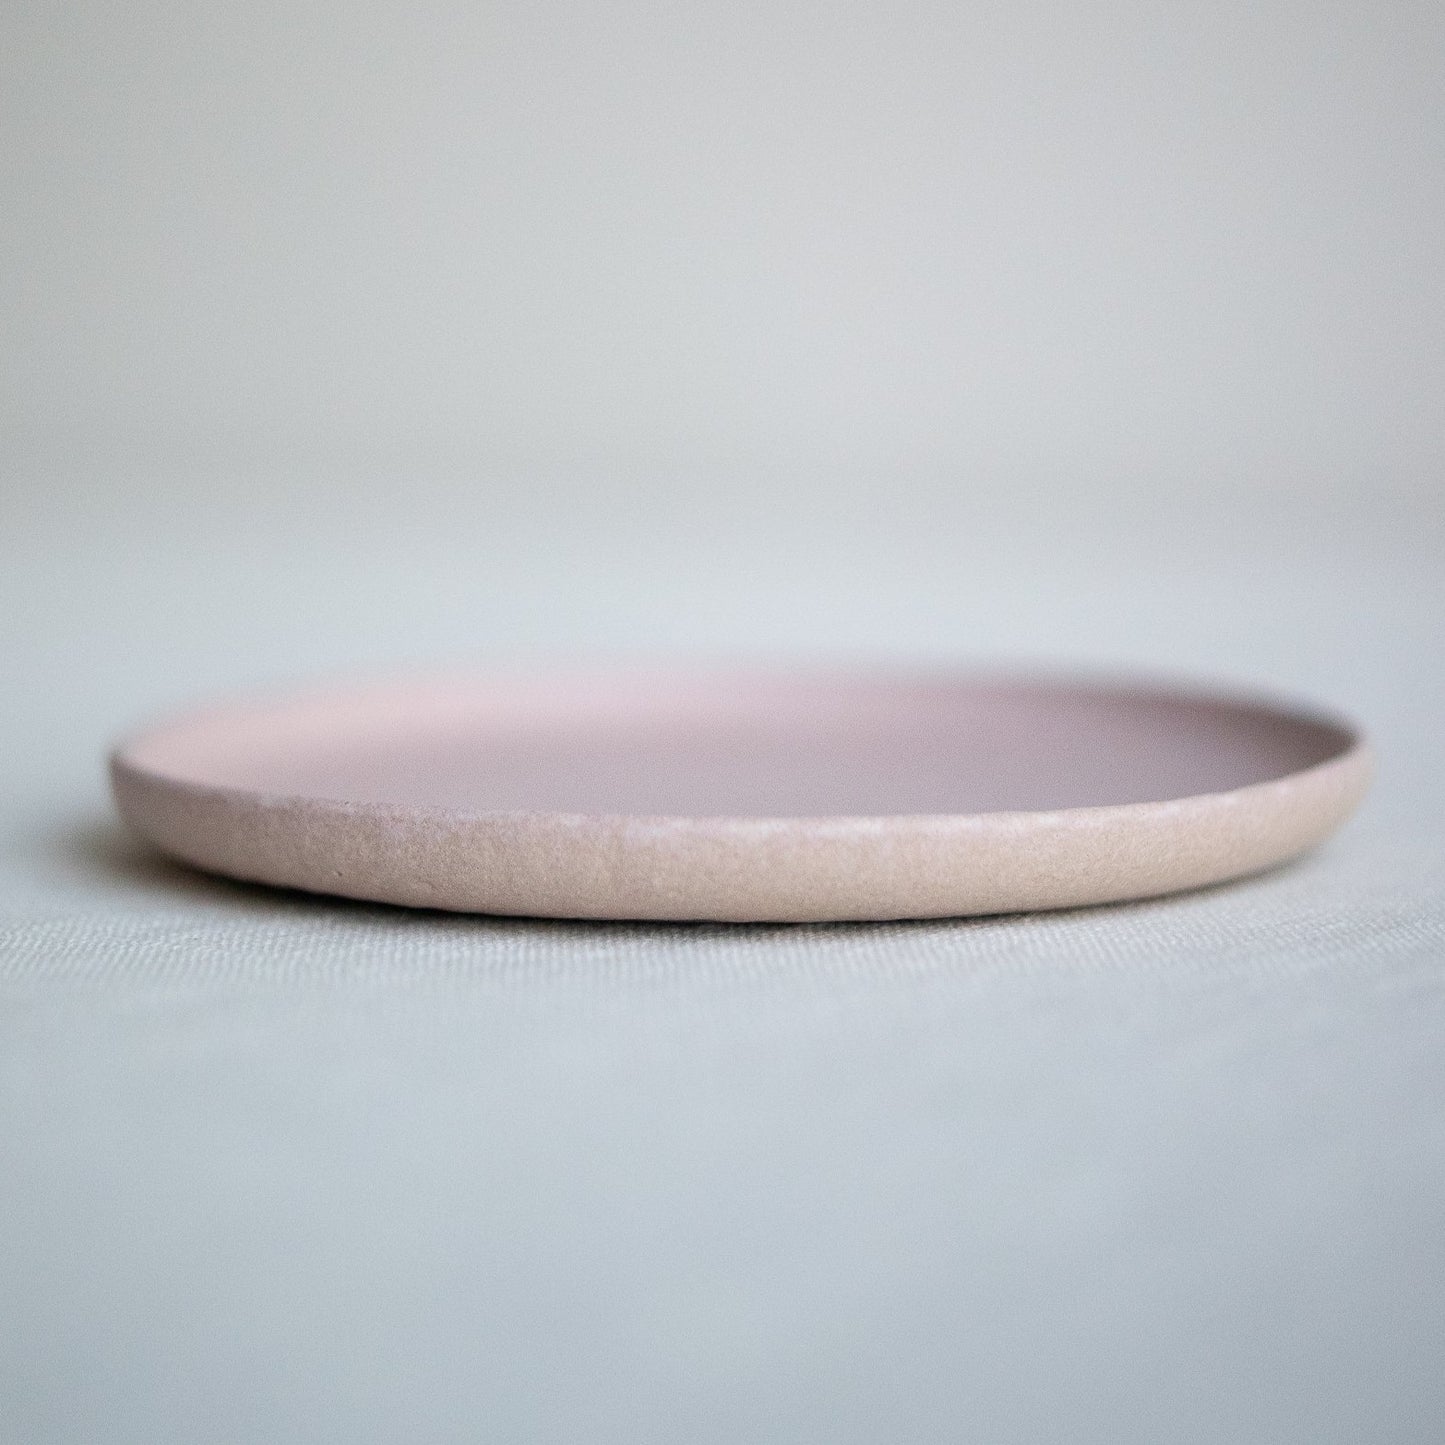 Plate in pale pink